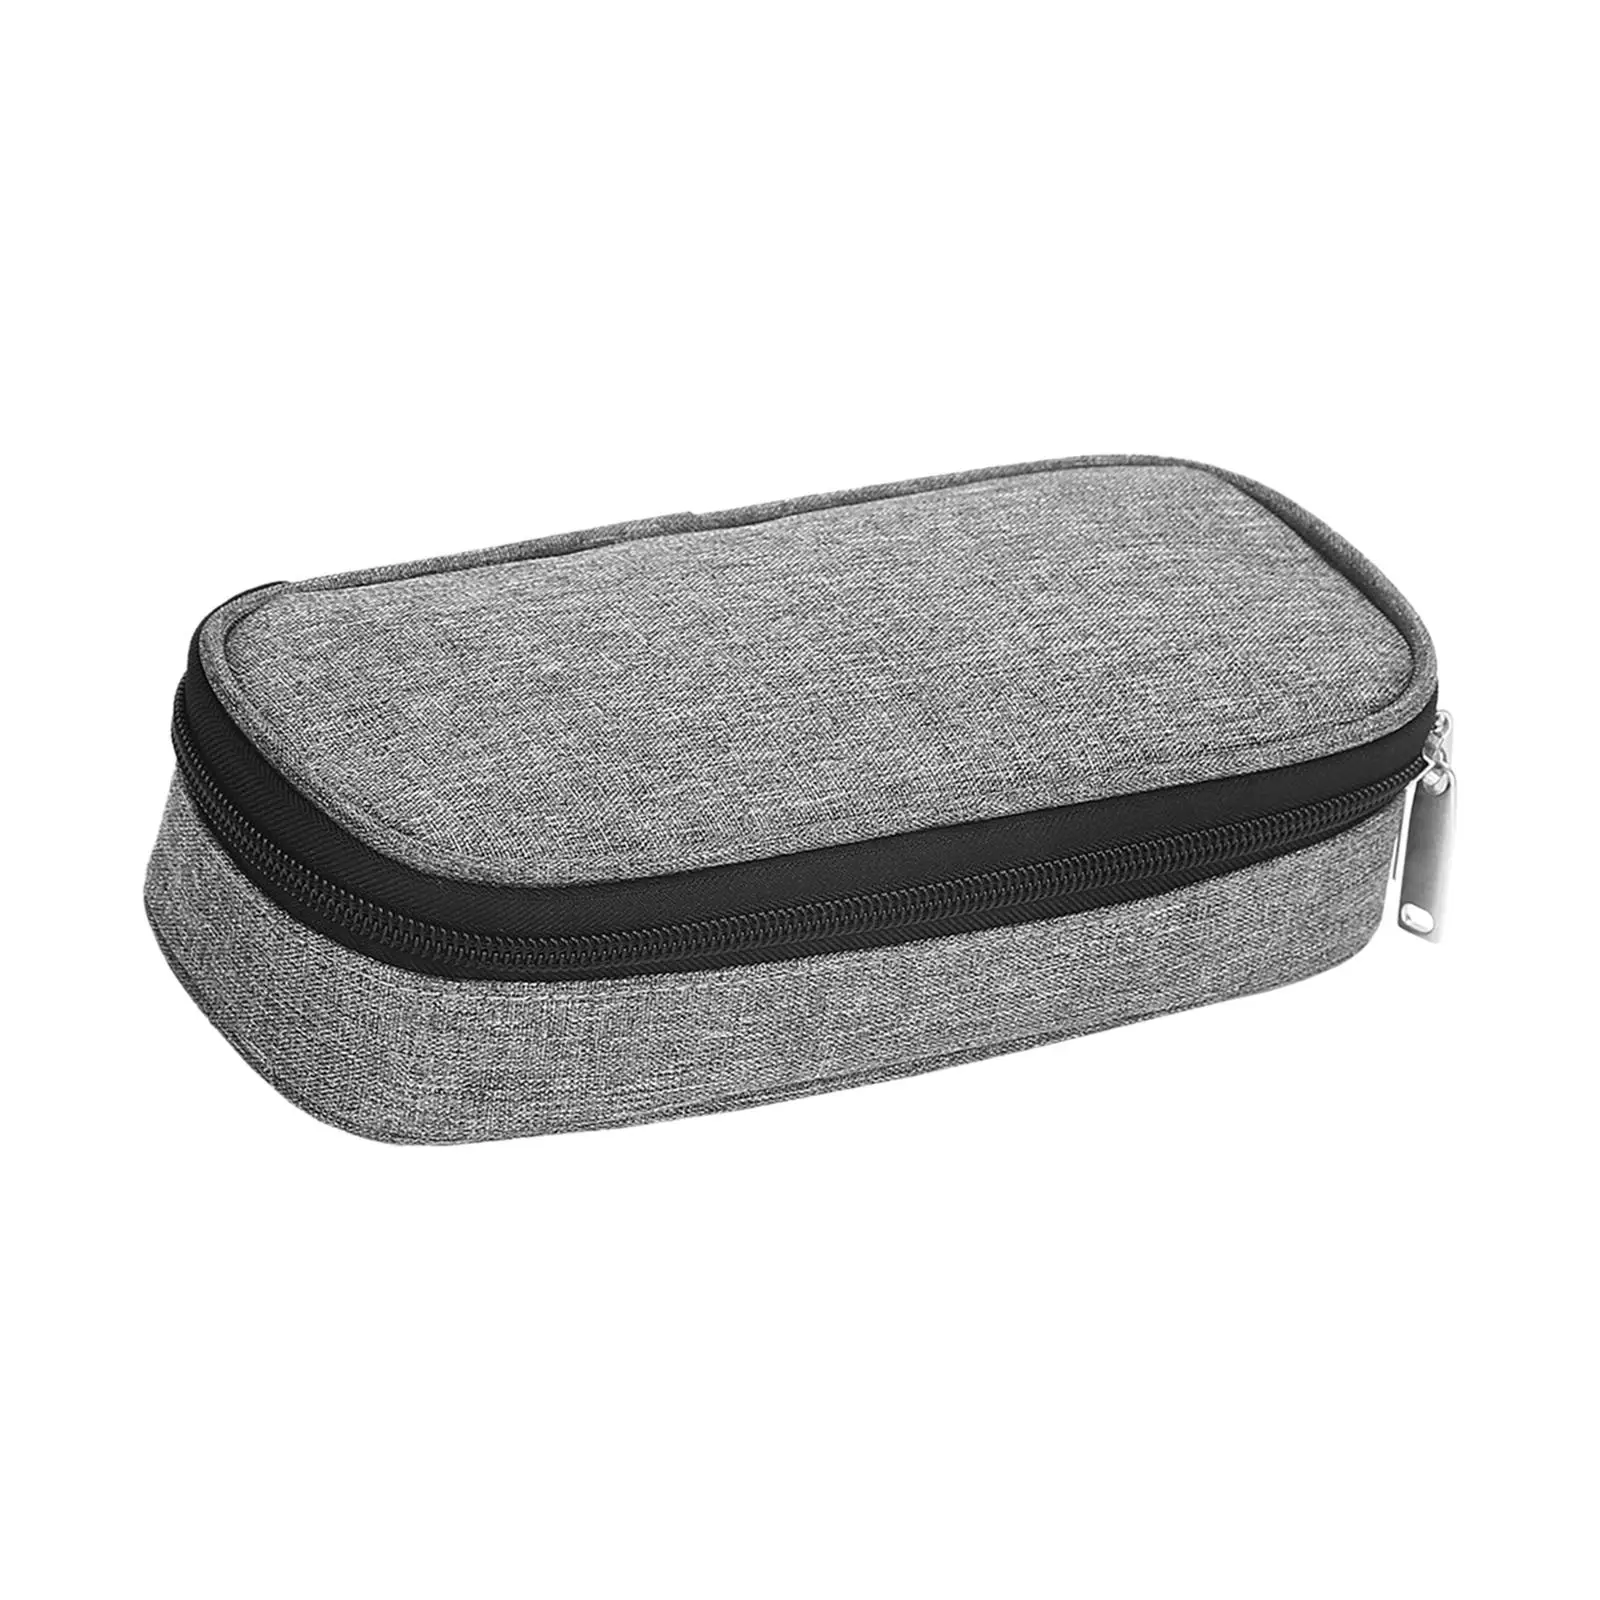 Medical Cooler Bag Portable Keep Cool Convenient Small Ice Pack Protector Carrying Bag Insulation Storage Bag Mini Isolated Pack